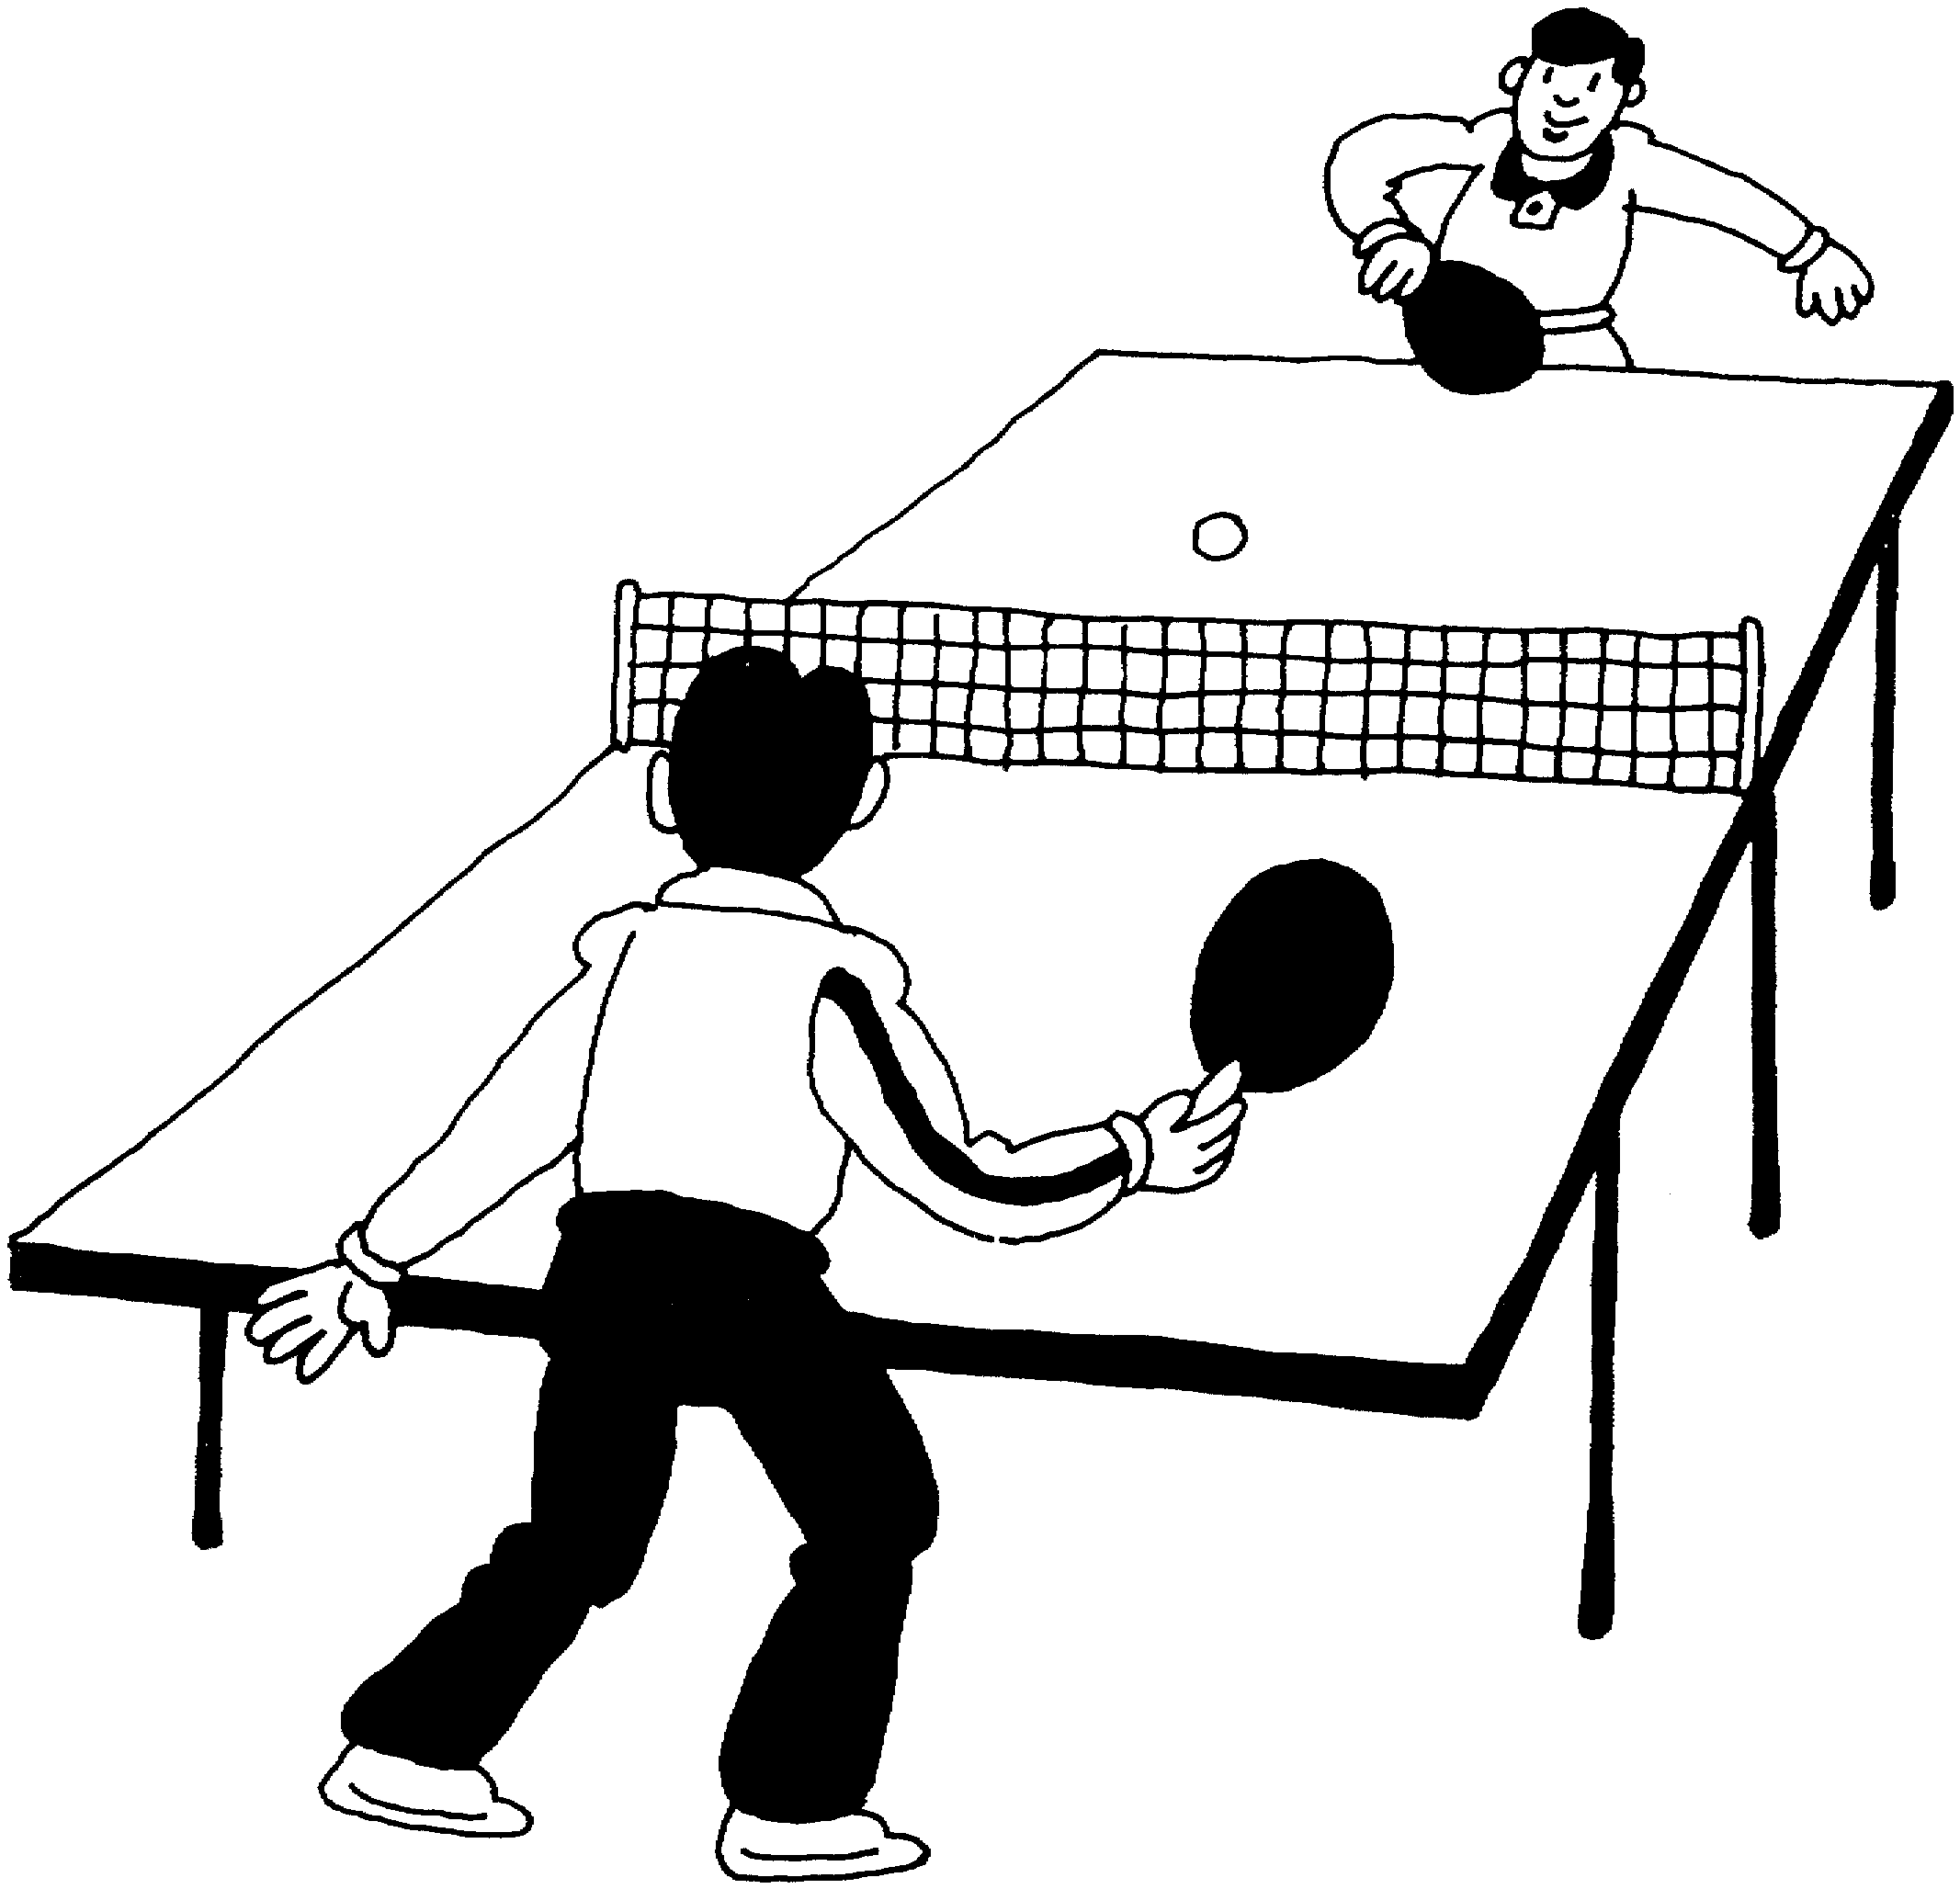 Table tennis clipart - Clipground